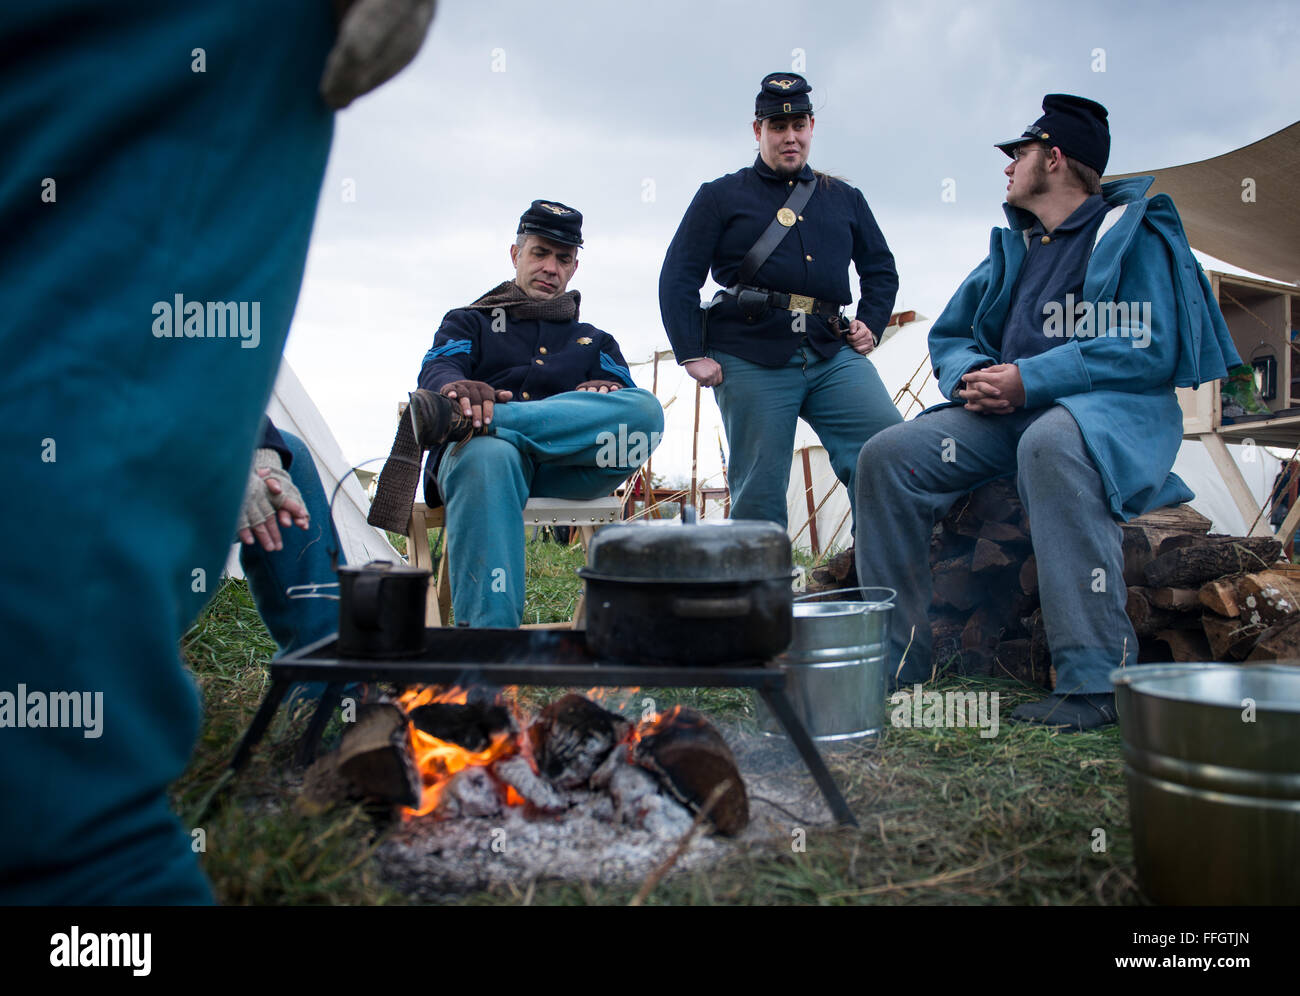 Pvt. Joshua Withrow (middle) and other members of the Union provost take moment to warm by the fire and talk about previous re-enactments they've attended. Joshua got into re-enactments with his father when they attended an event in 2000. Stock Photo